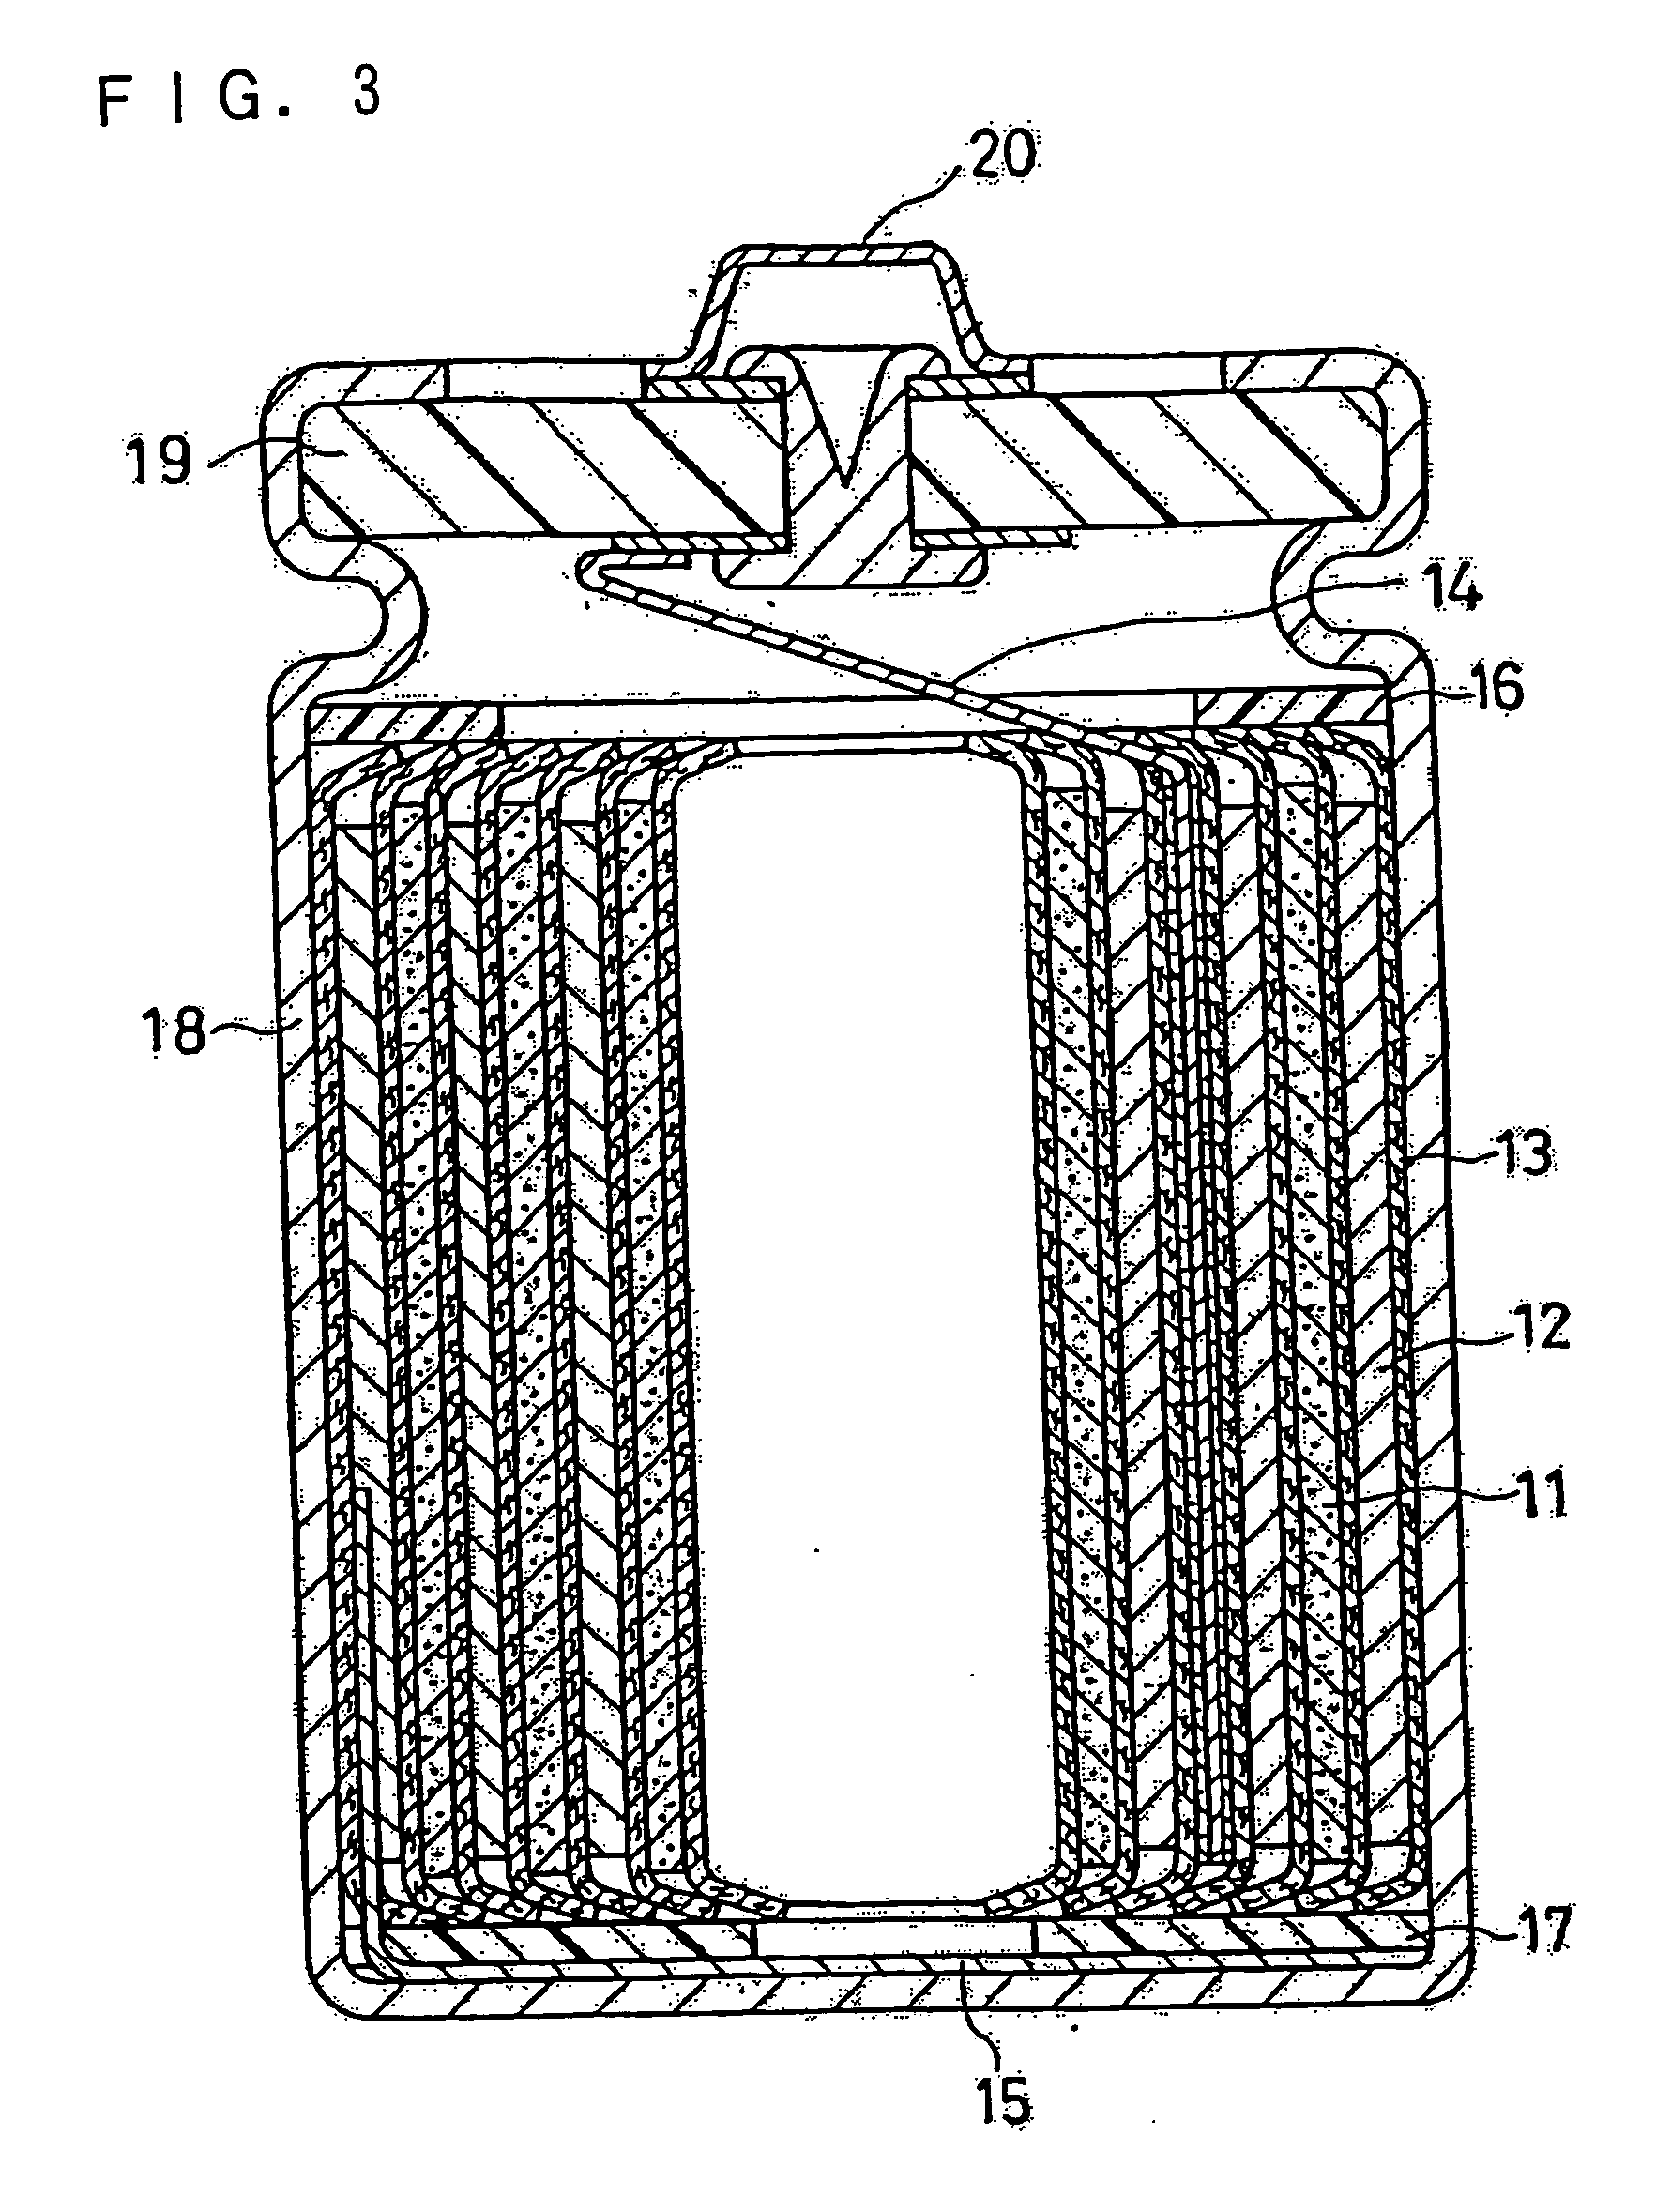 Non-aqueous electrolyte secondary battery and method of producing coating for negative electrode active material thereof